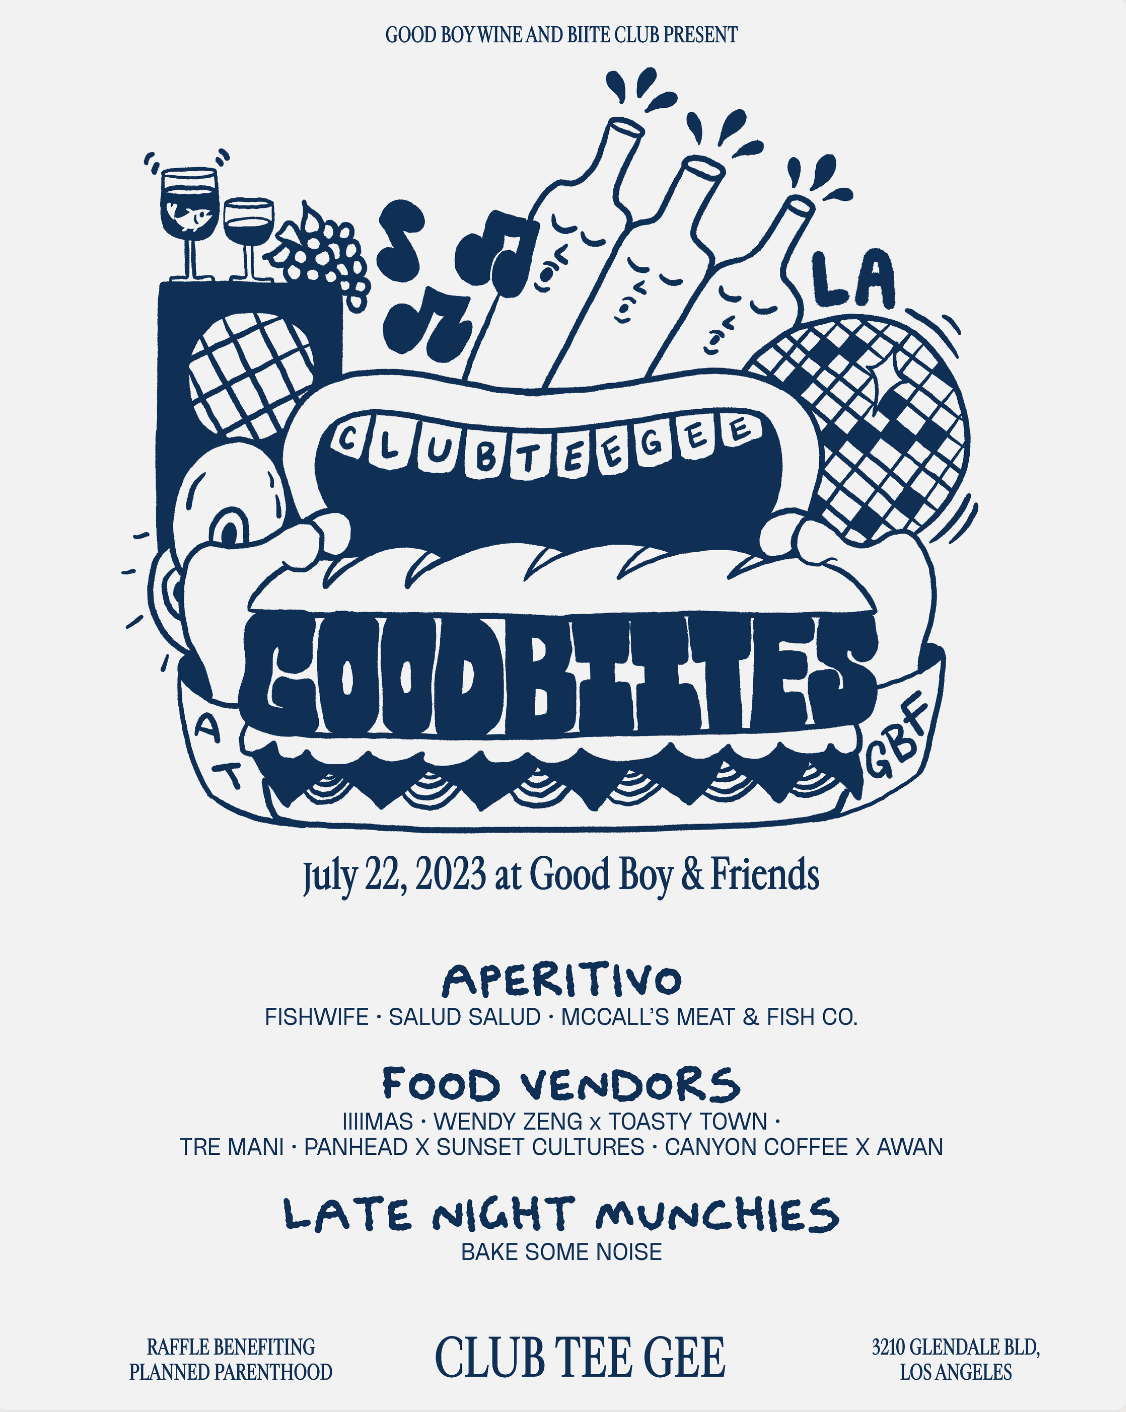 "Good Biites" for Good Boy And Friends: A Festival of Natural Wine & Supernatural Food